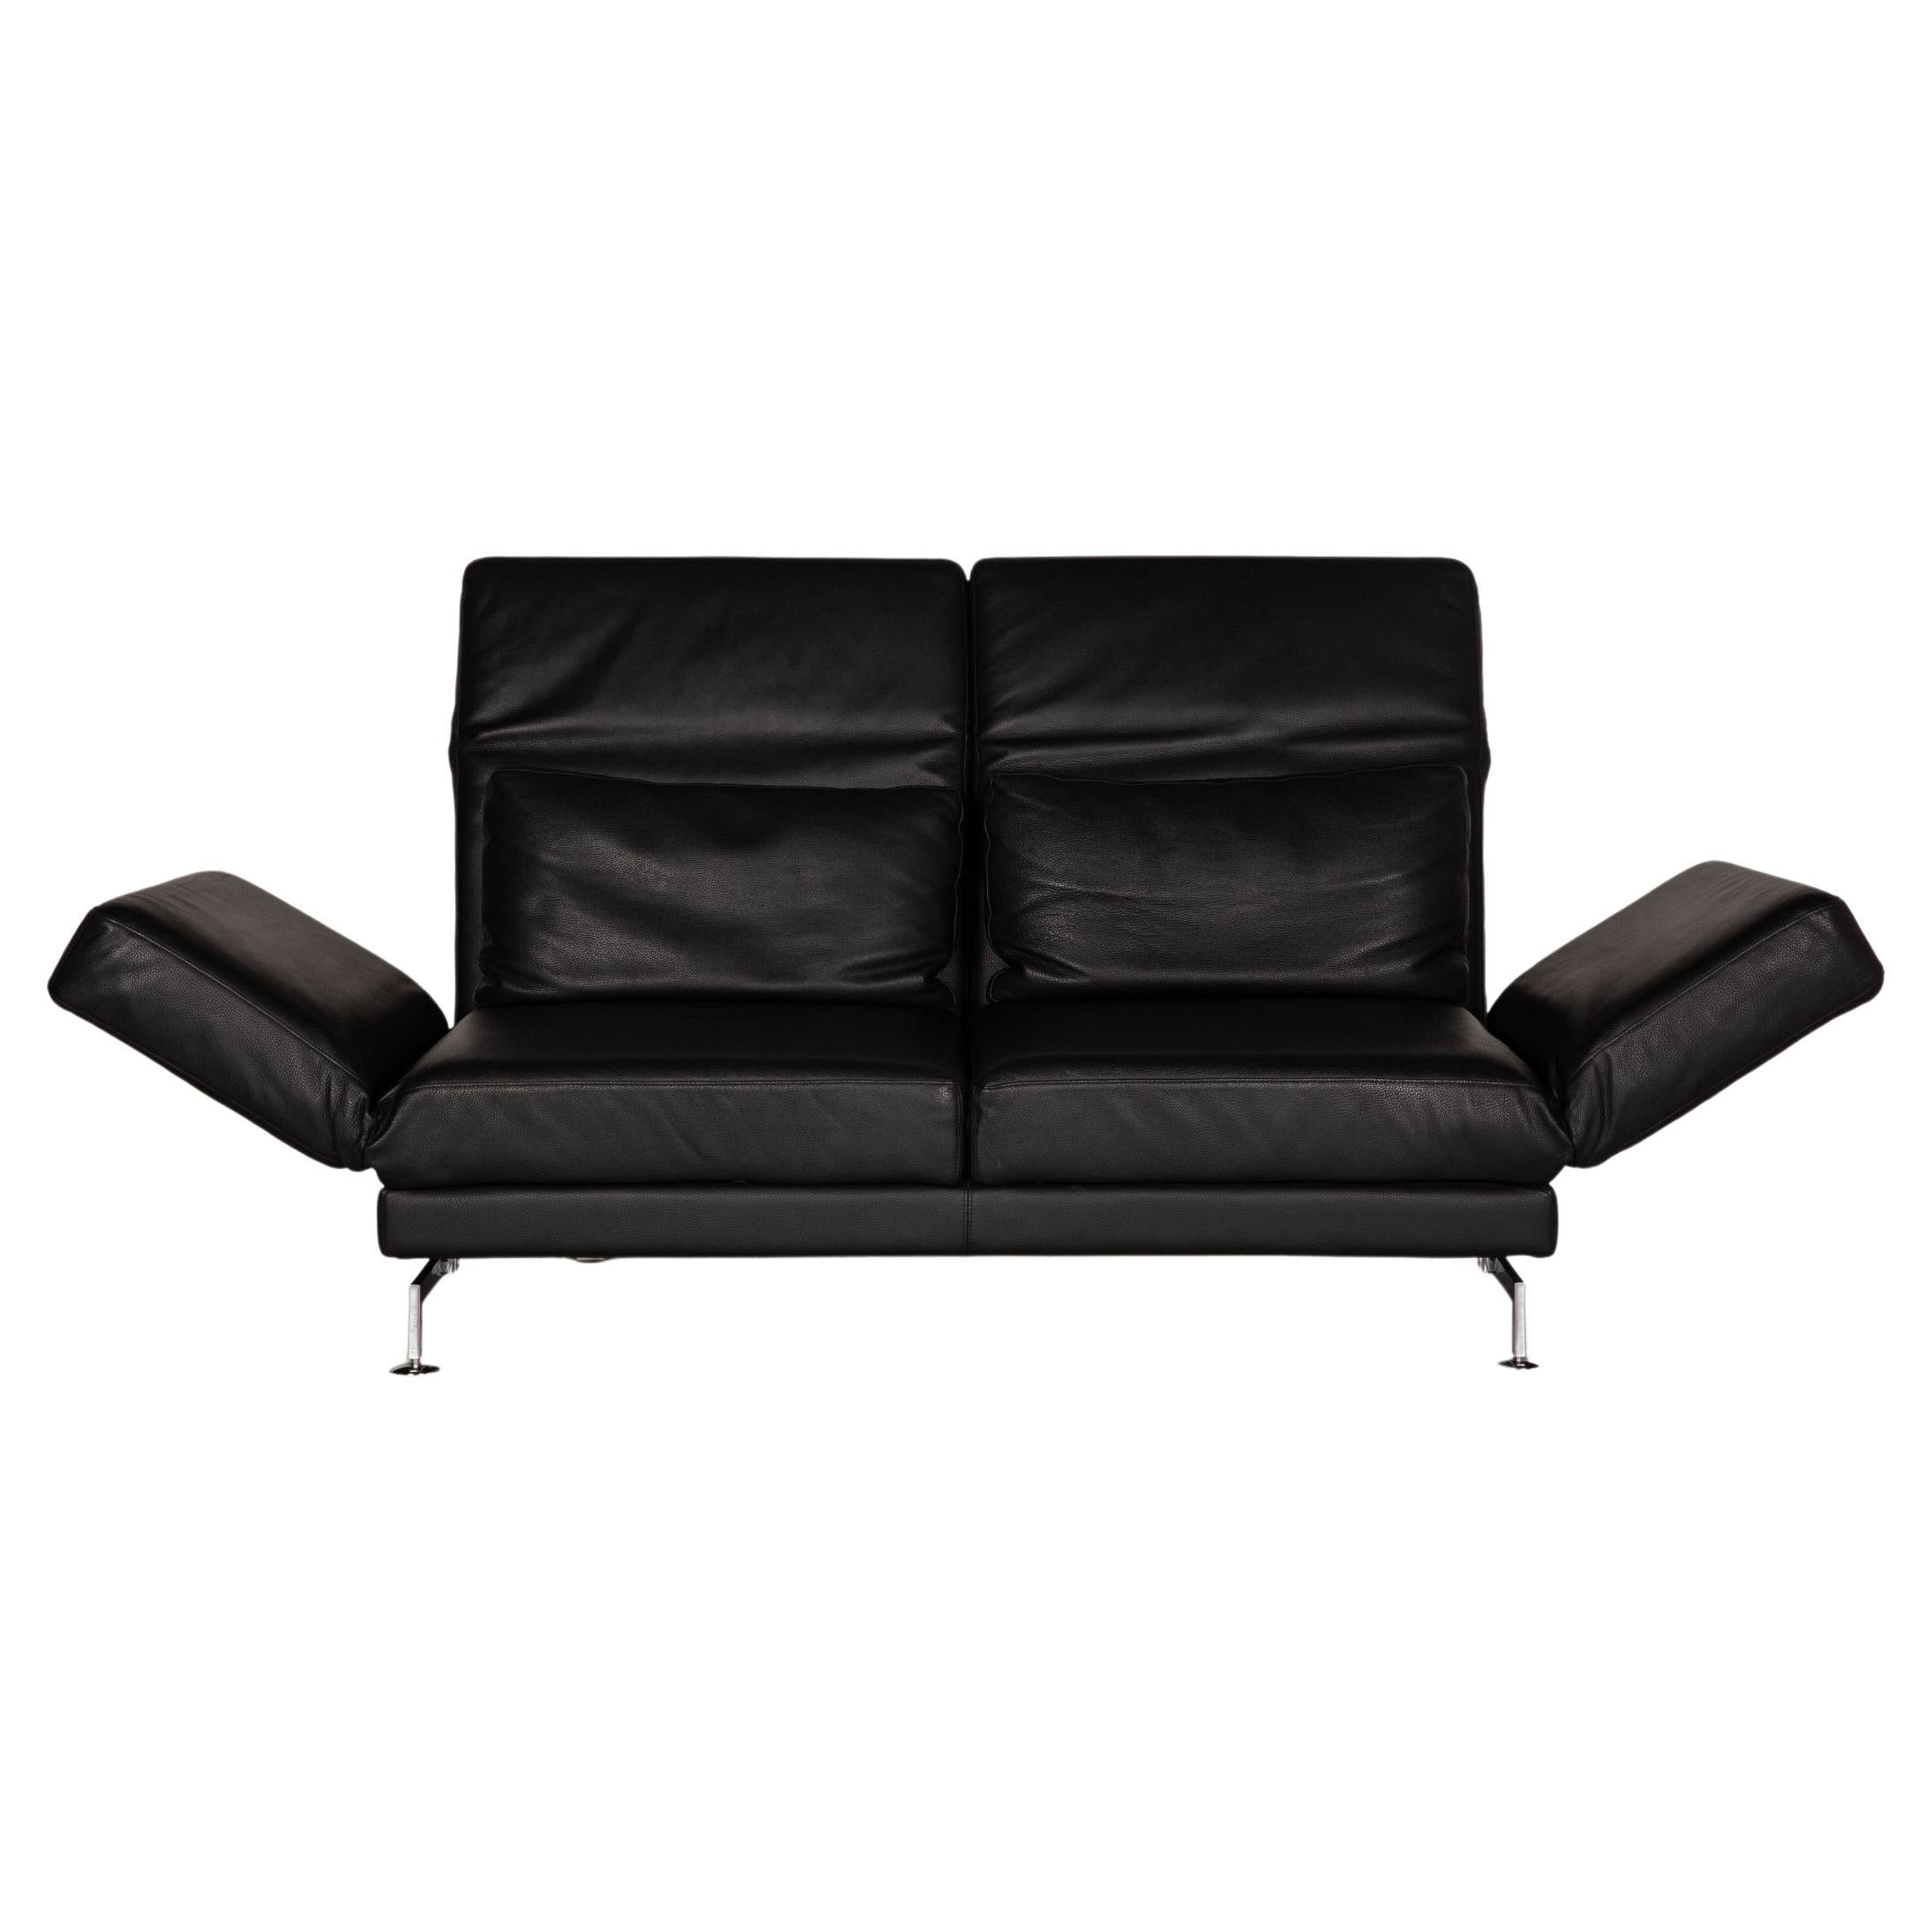 Brühl & Sippold Moule Leather Sofa Black Two-Seater Couch Function Sleeping For Sale